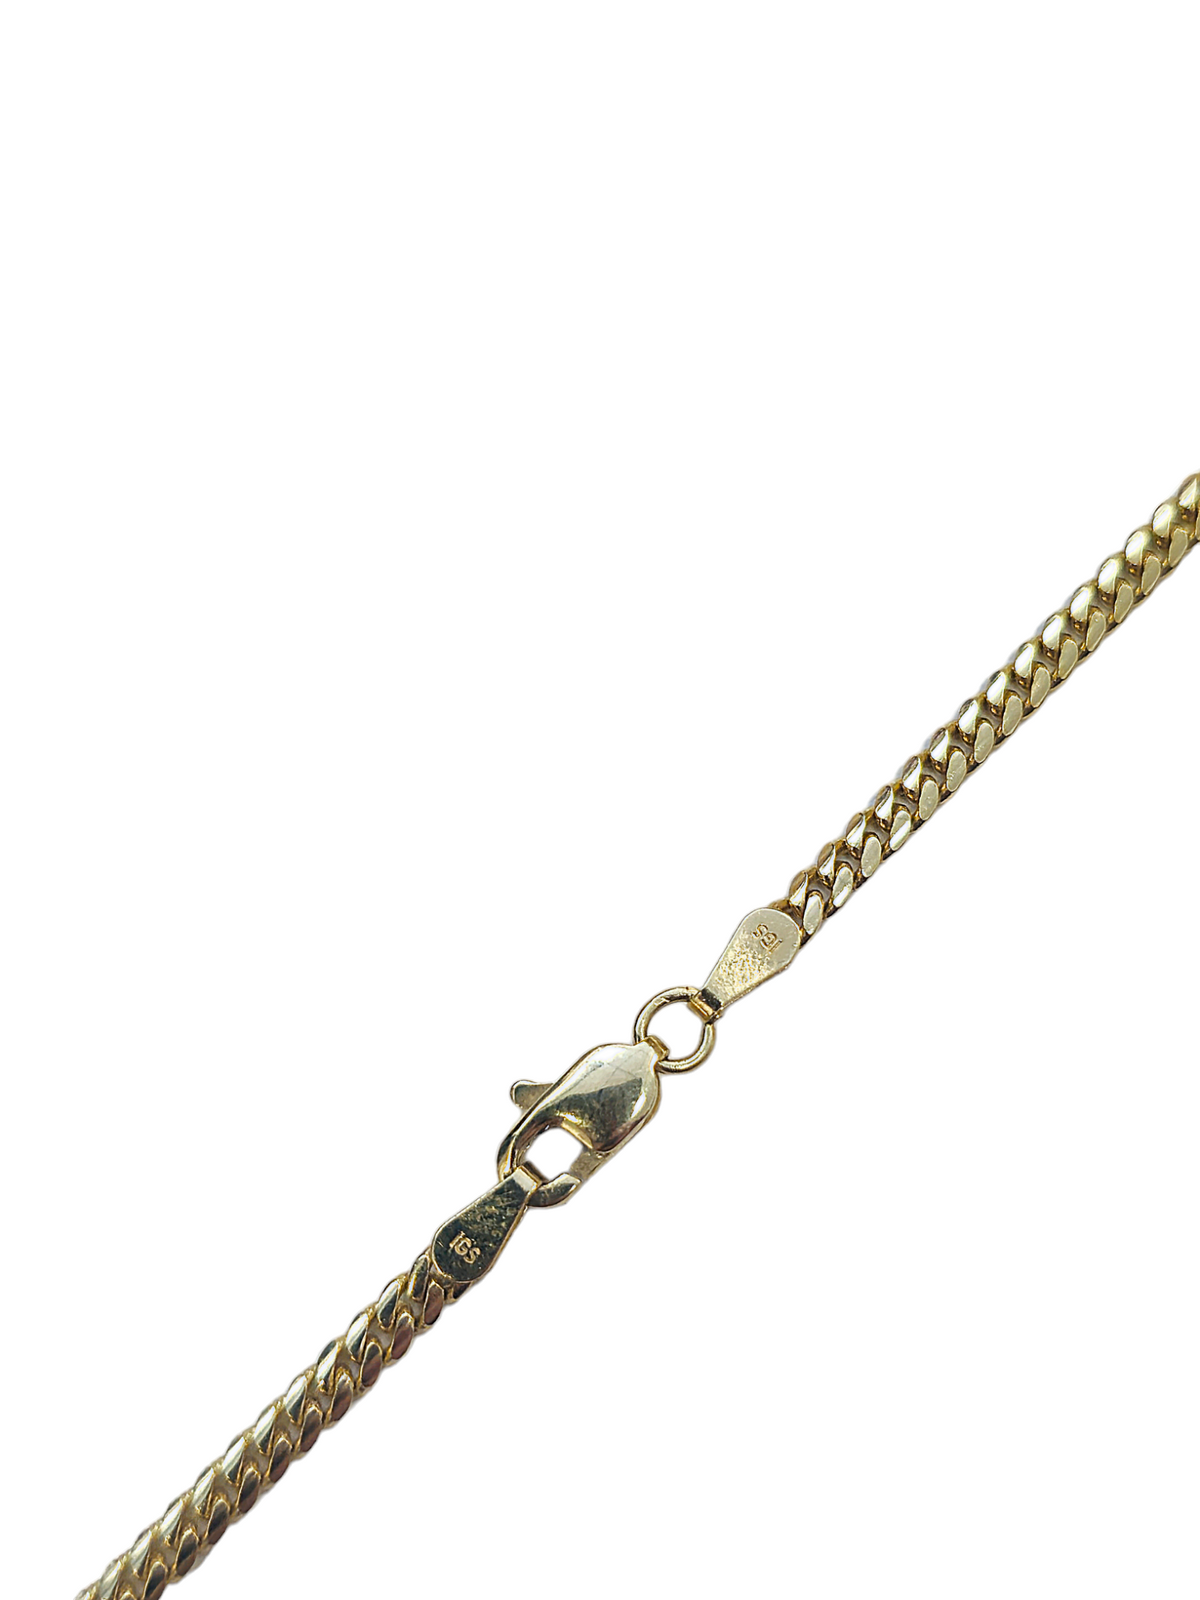 Solid Cuban Link style necklace made in solid 14-karat yellow gold 22"